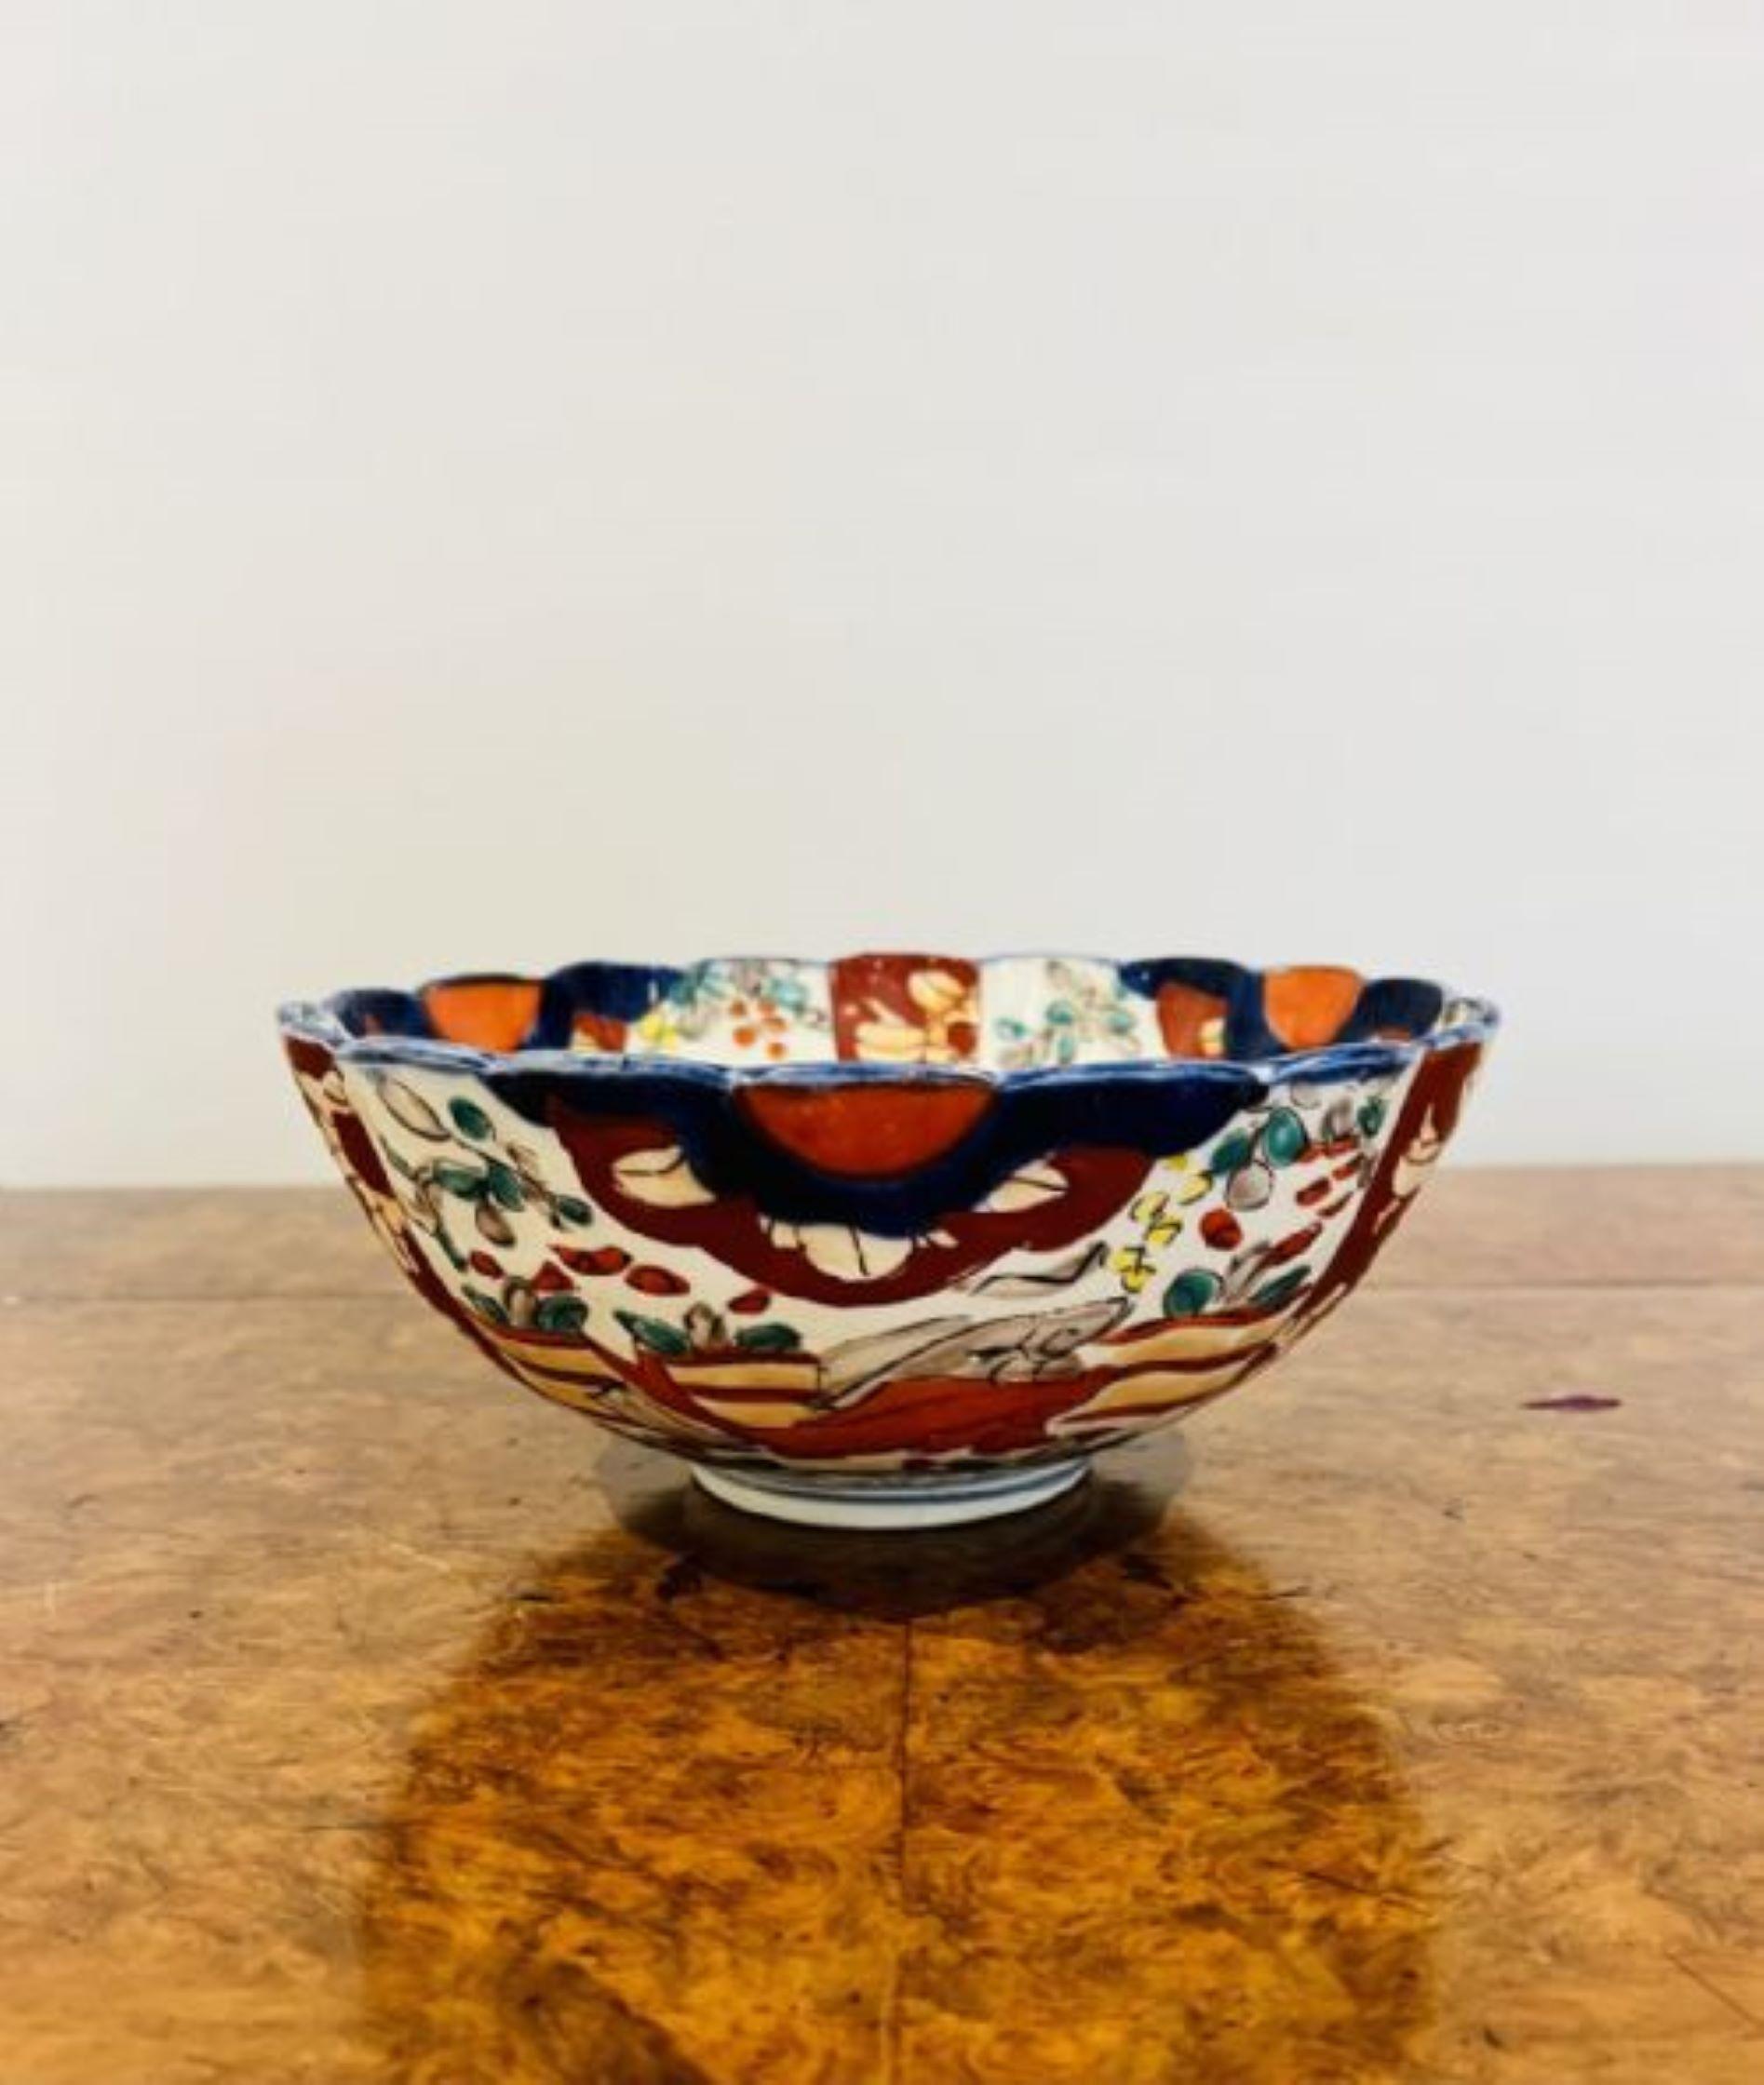 Lovely antique Japanese imari bowl with a scallop shaped edge having a lovely antique Japanese imari bowl with wonderful hand painted panels with leaves, trees, fish and flowers in wonderful red, blue, green and white colours. 